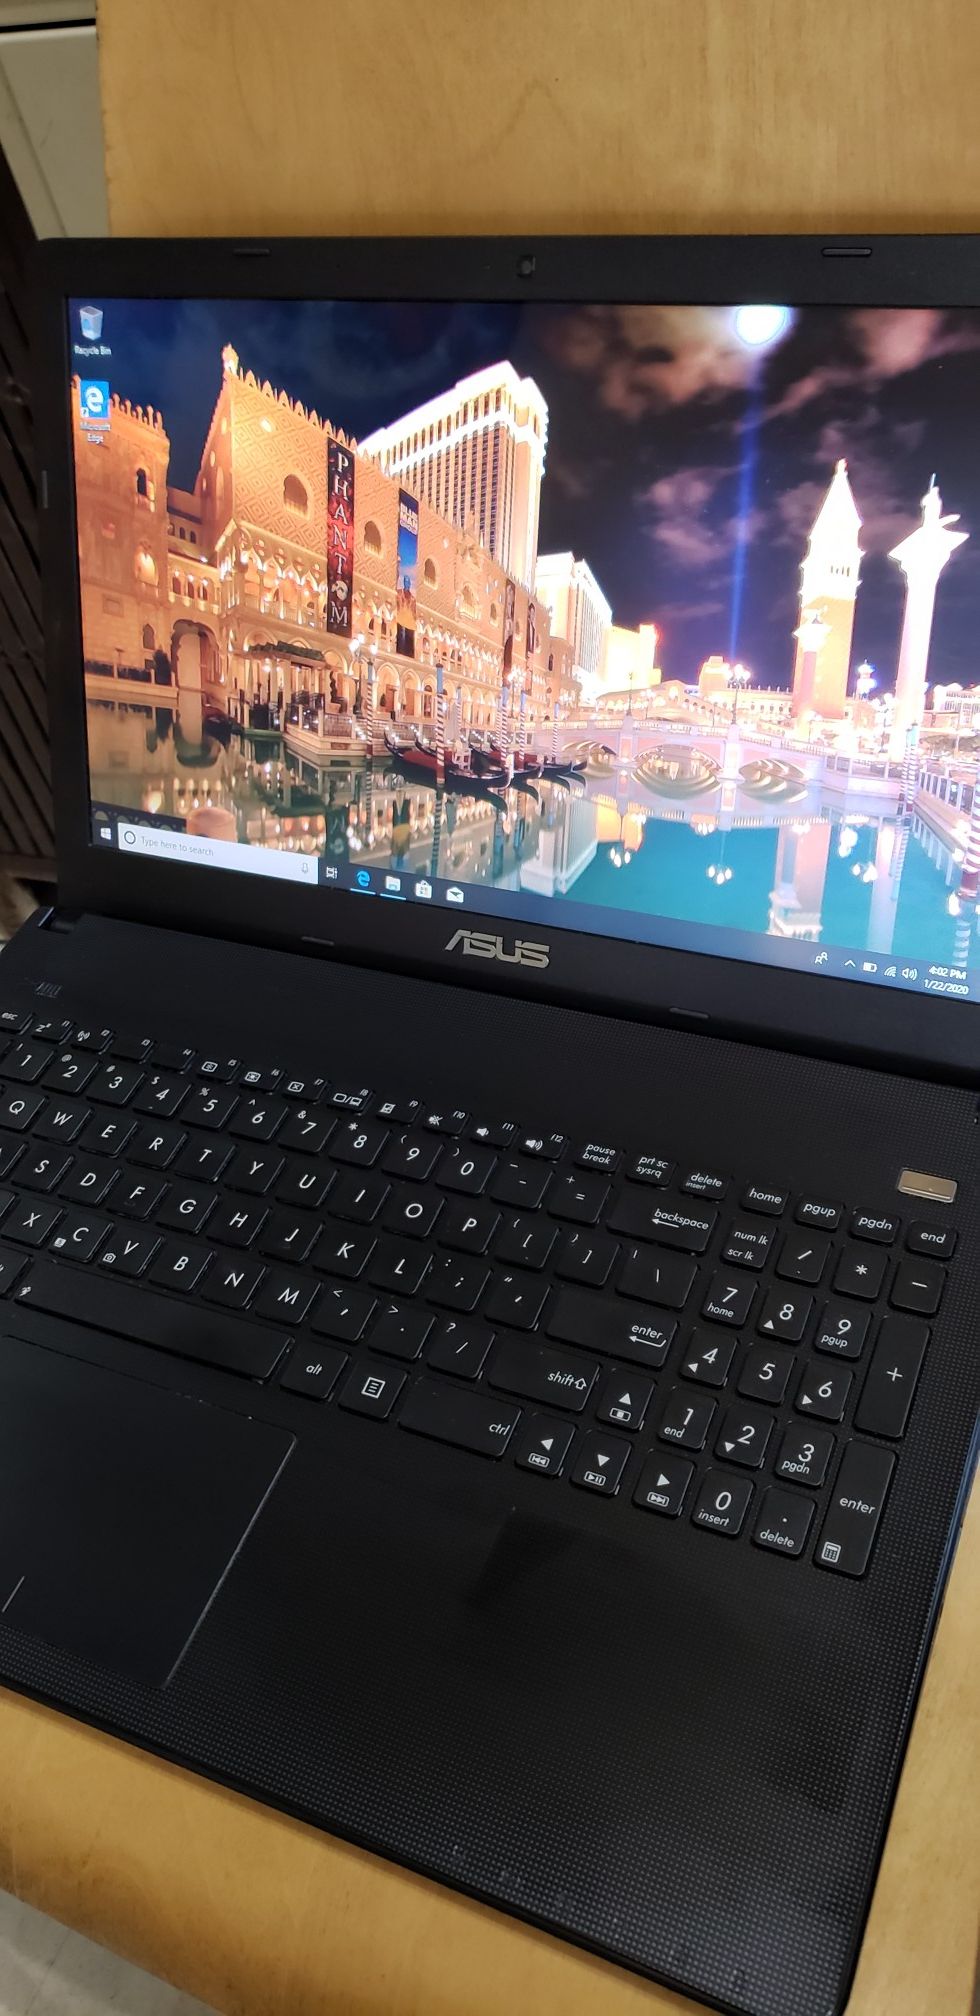 ASUS LAPTOP COMPUTER 15.6" FAST 4GB RAM 500GB HDD WINDOWS 10 OFFICE 2019 WEBCAM EVERYTHING WORKS LIKE NEW